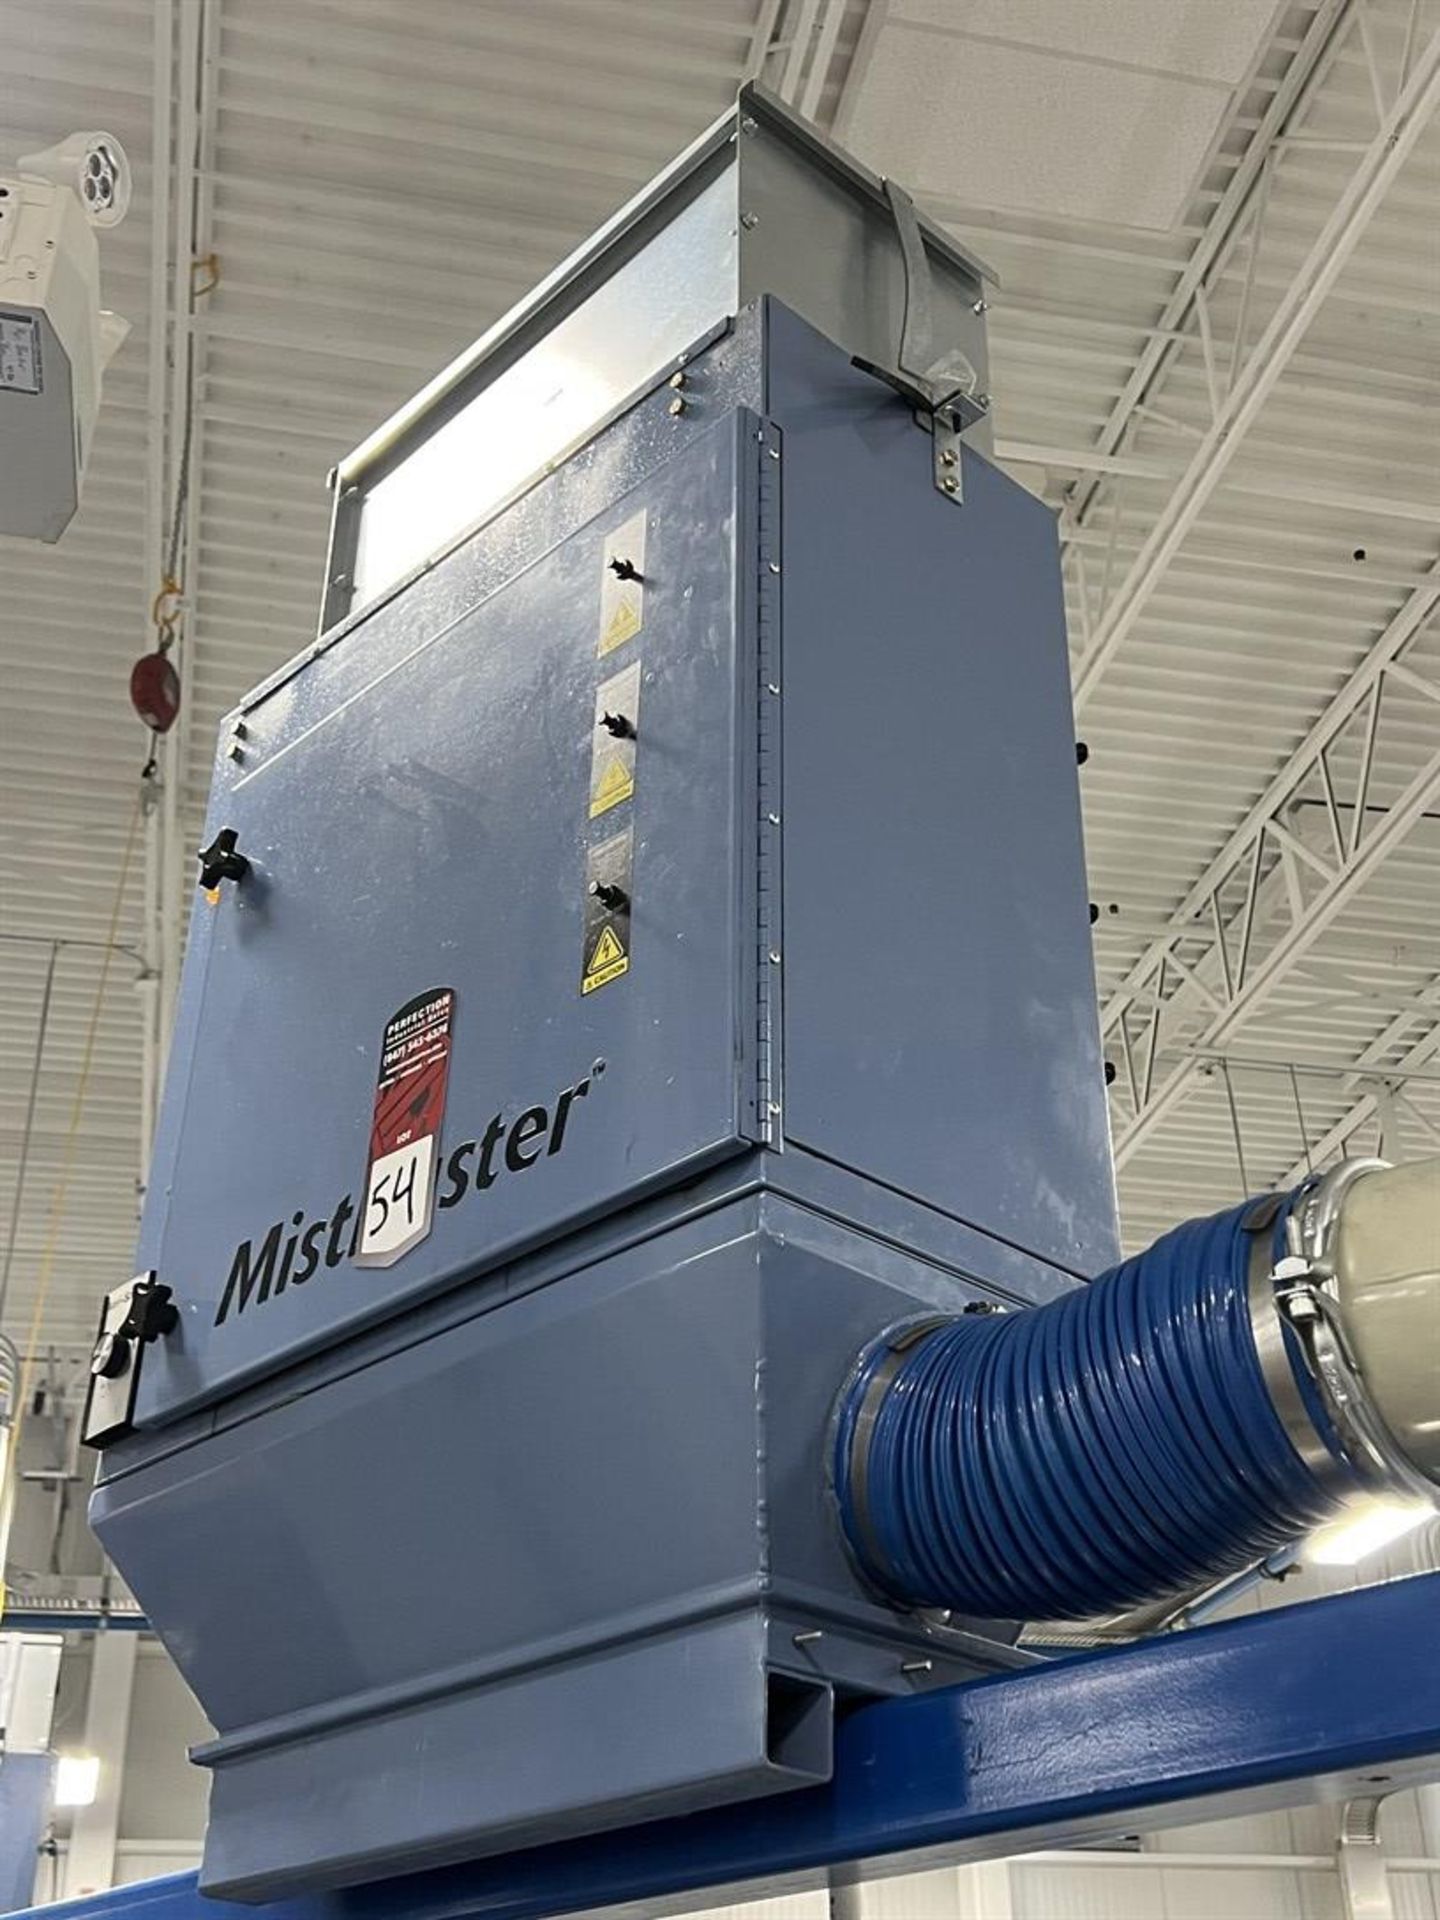 AIR QUALITY ENGINEERING Mistbuster 850 Air Cleaning System - Image 2 of 4